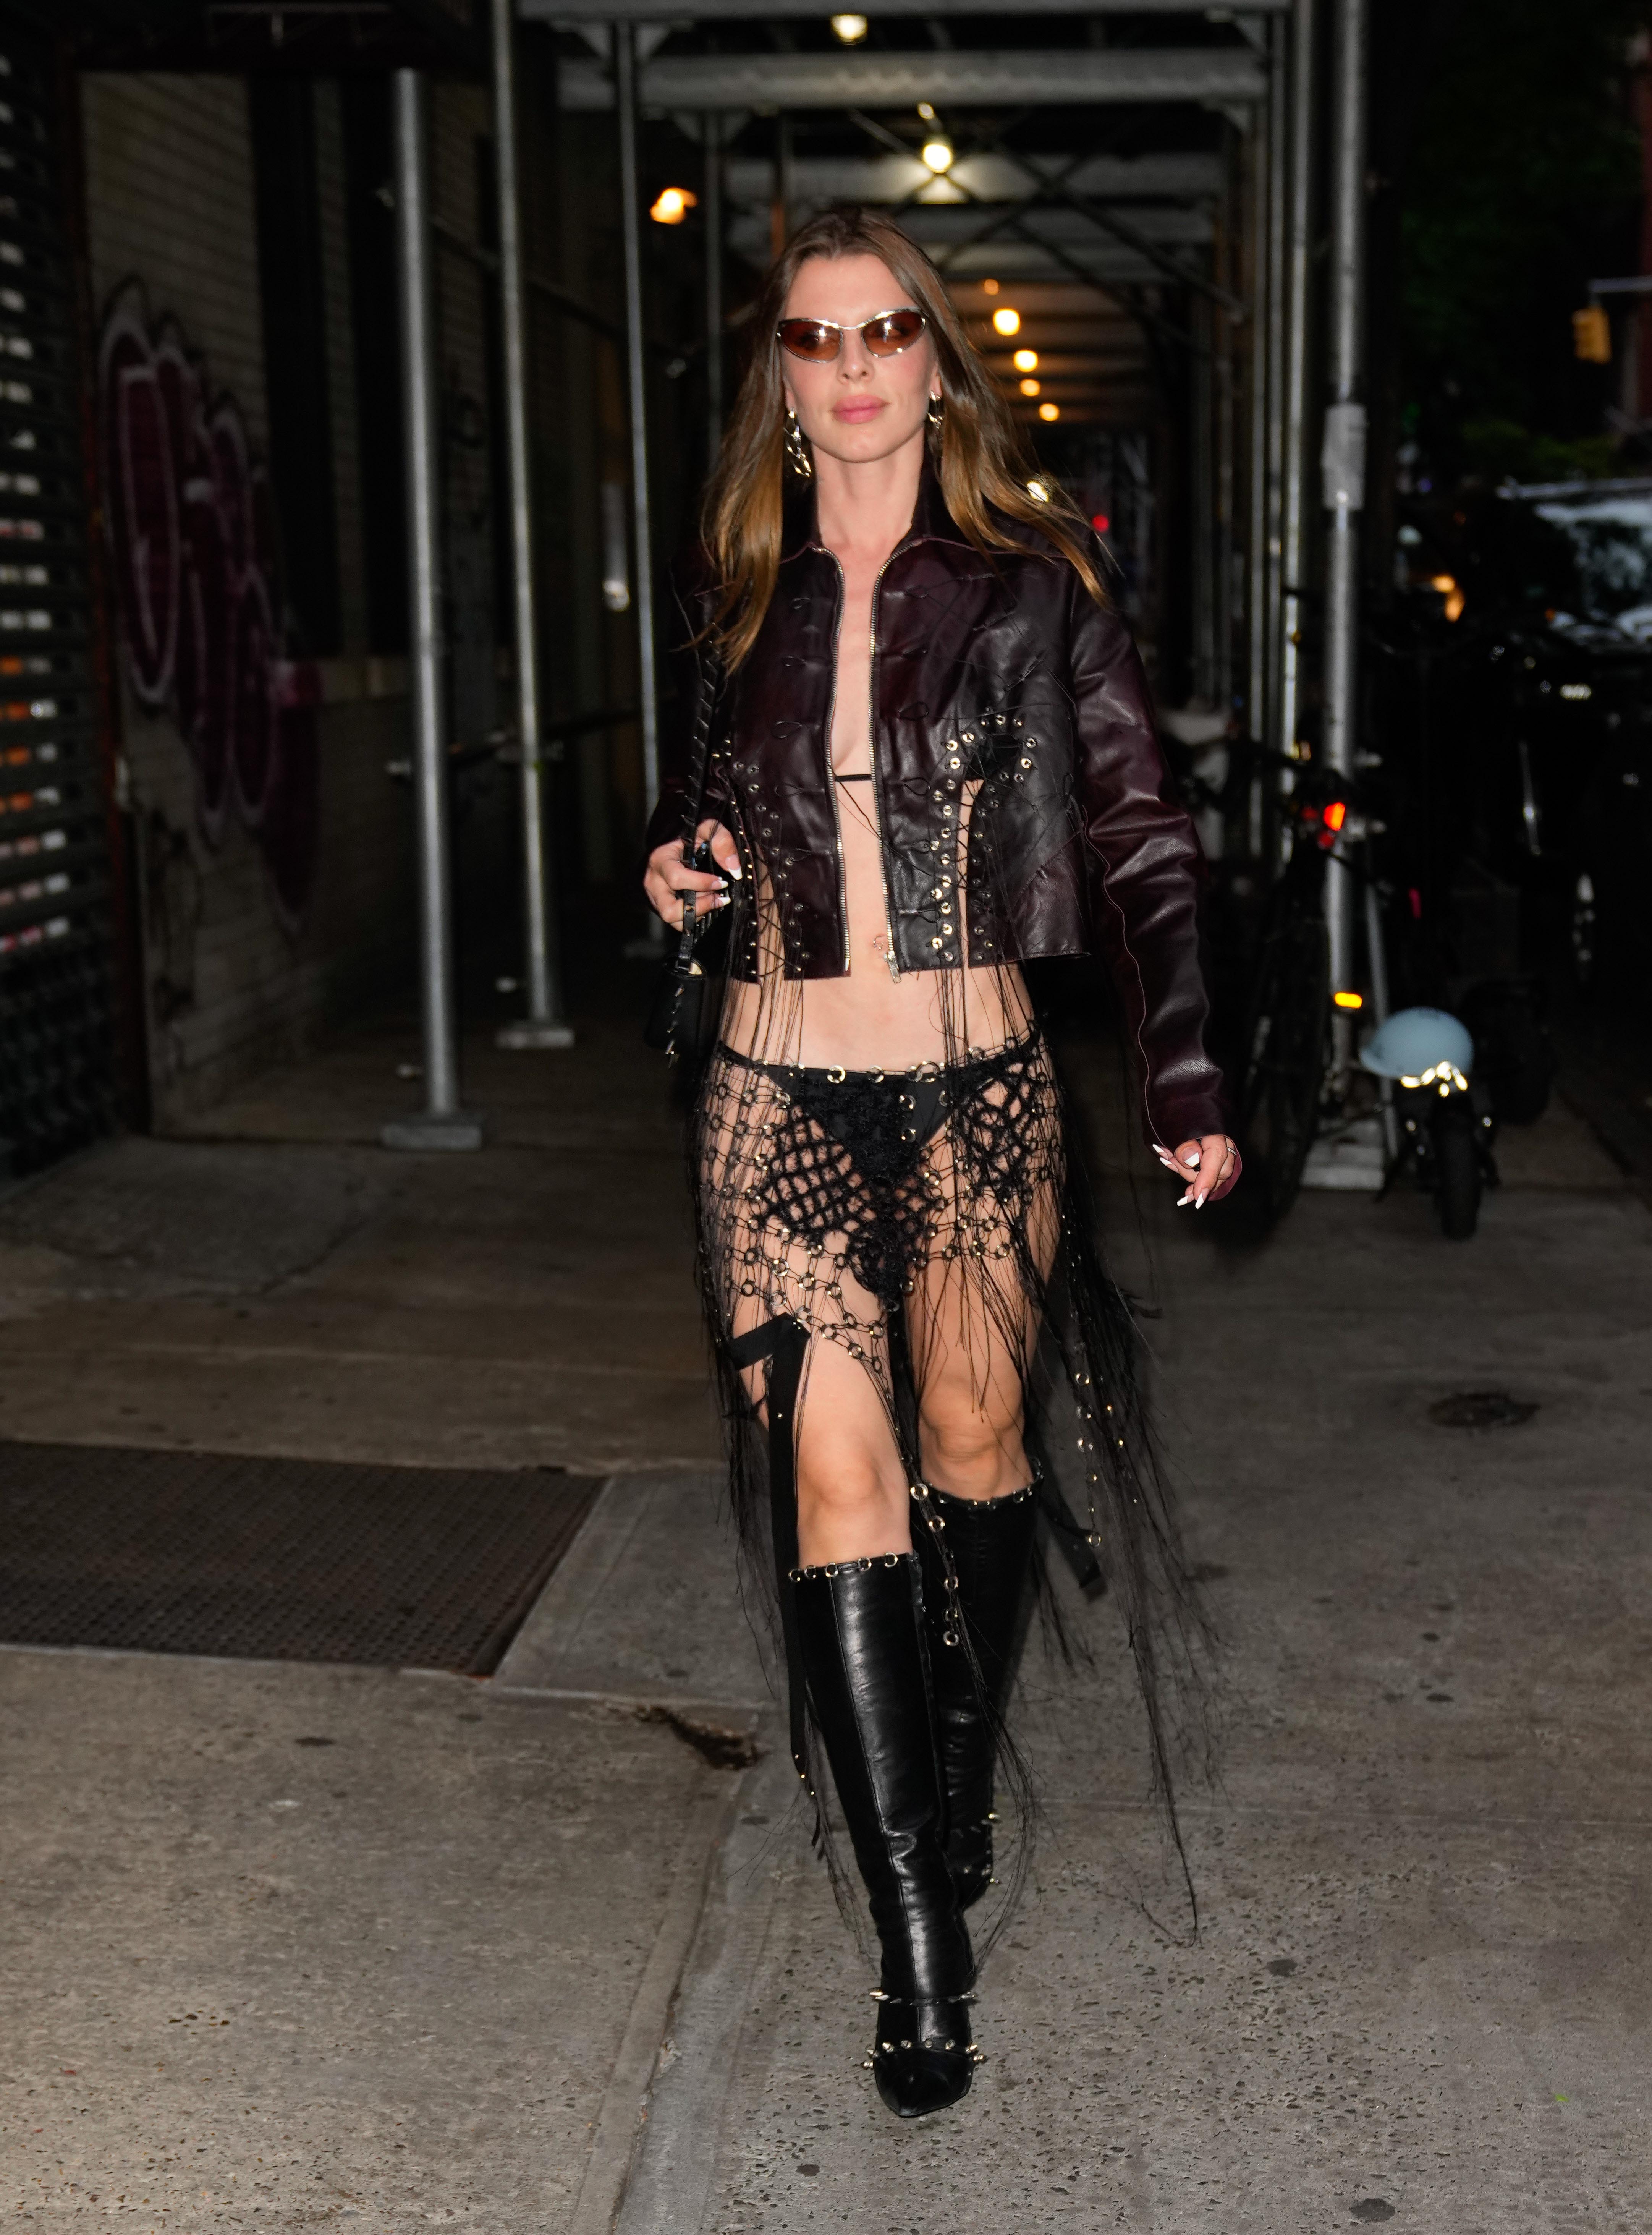 Julia Fox went out for the night in New York with an incredible style.  The actress and model wore a black bikini with many fringes, and accompanied it with a black leather jacket, combined with knee-high leather boots and glasses.